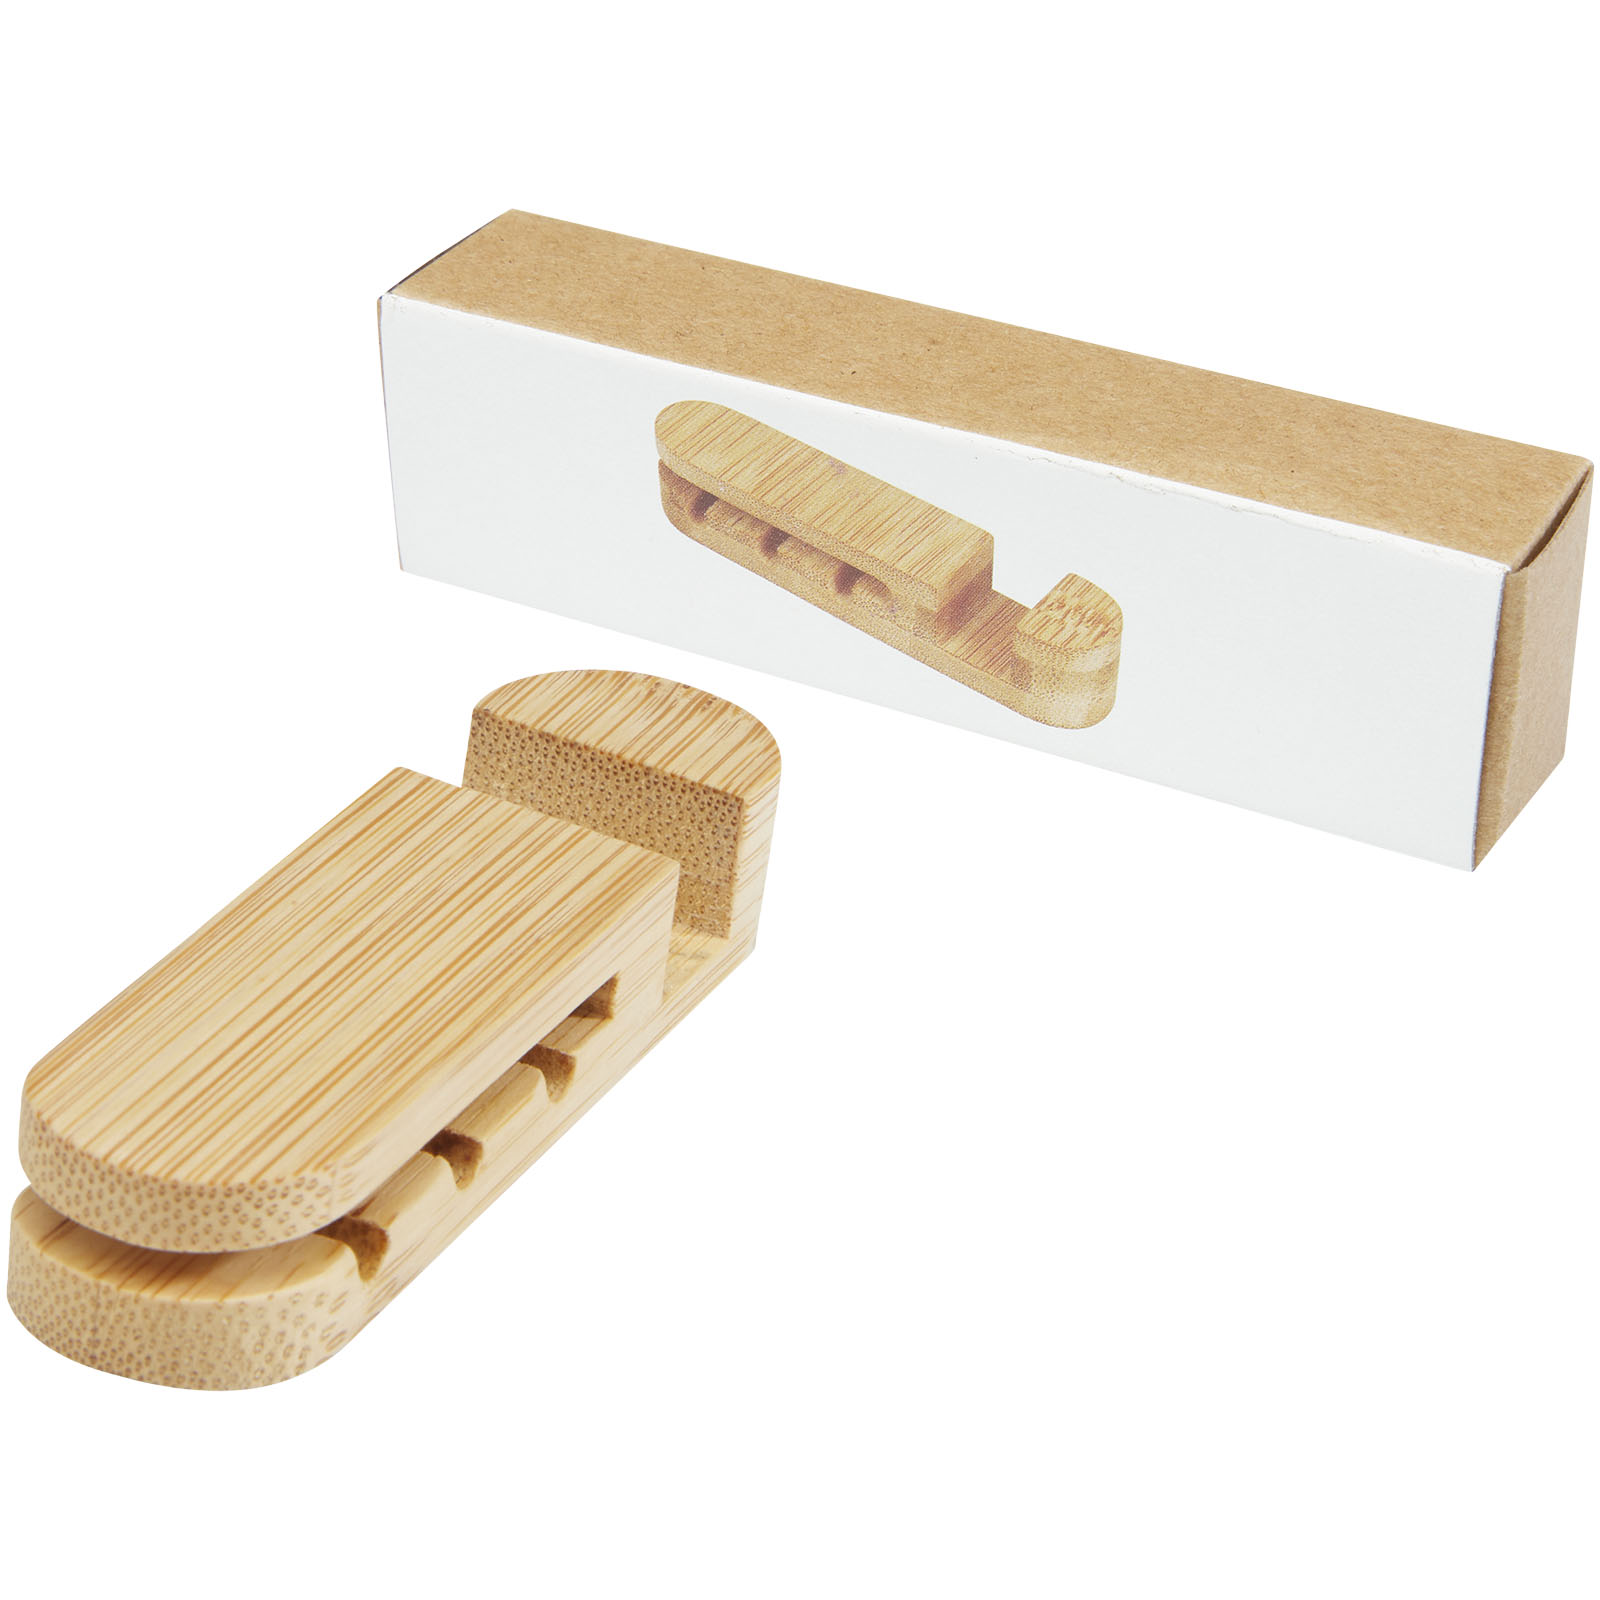 Advertising Telephone & Tablet Accessories - Edulis bamboo cable manager  - 5